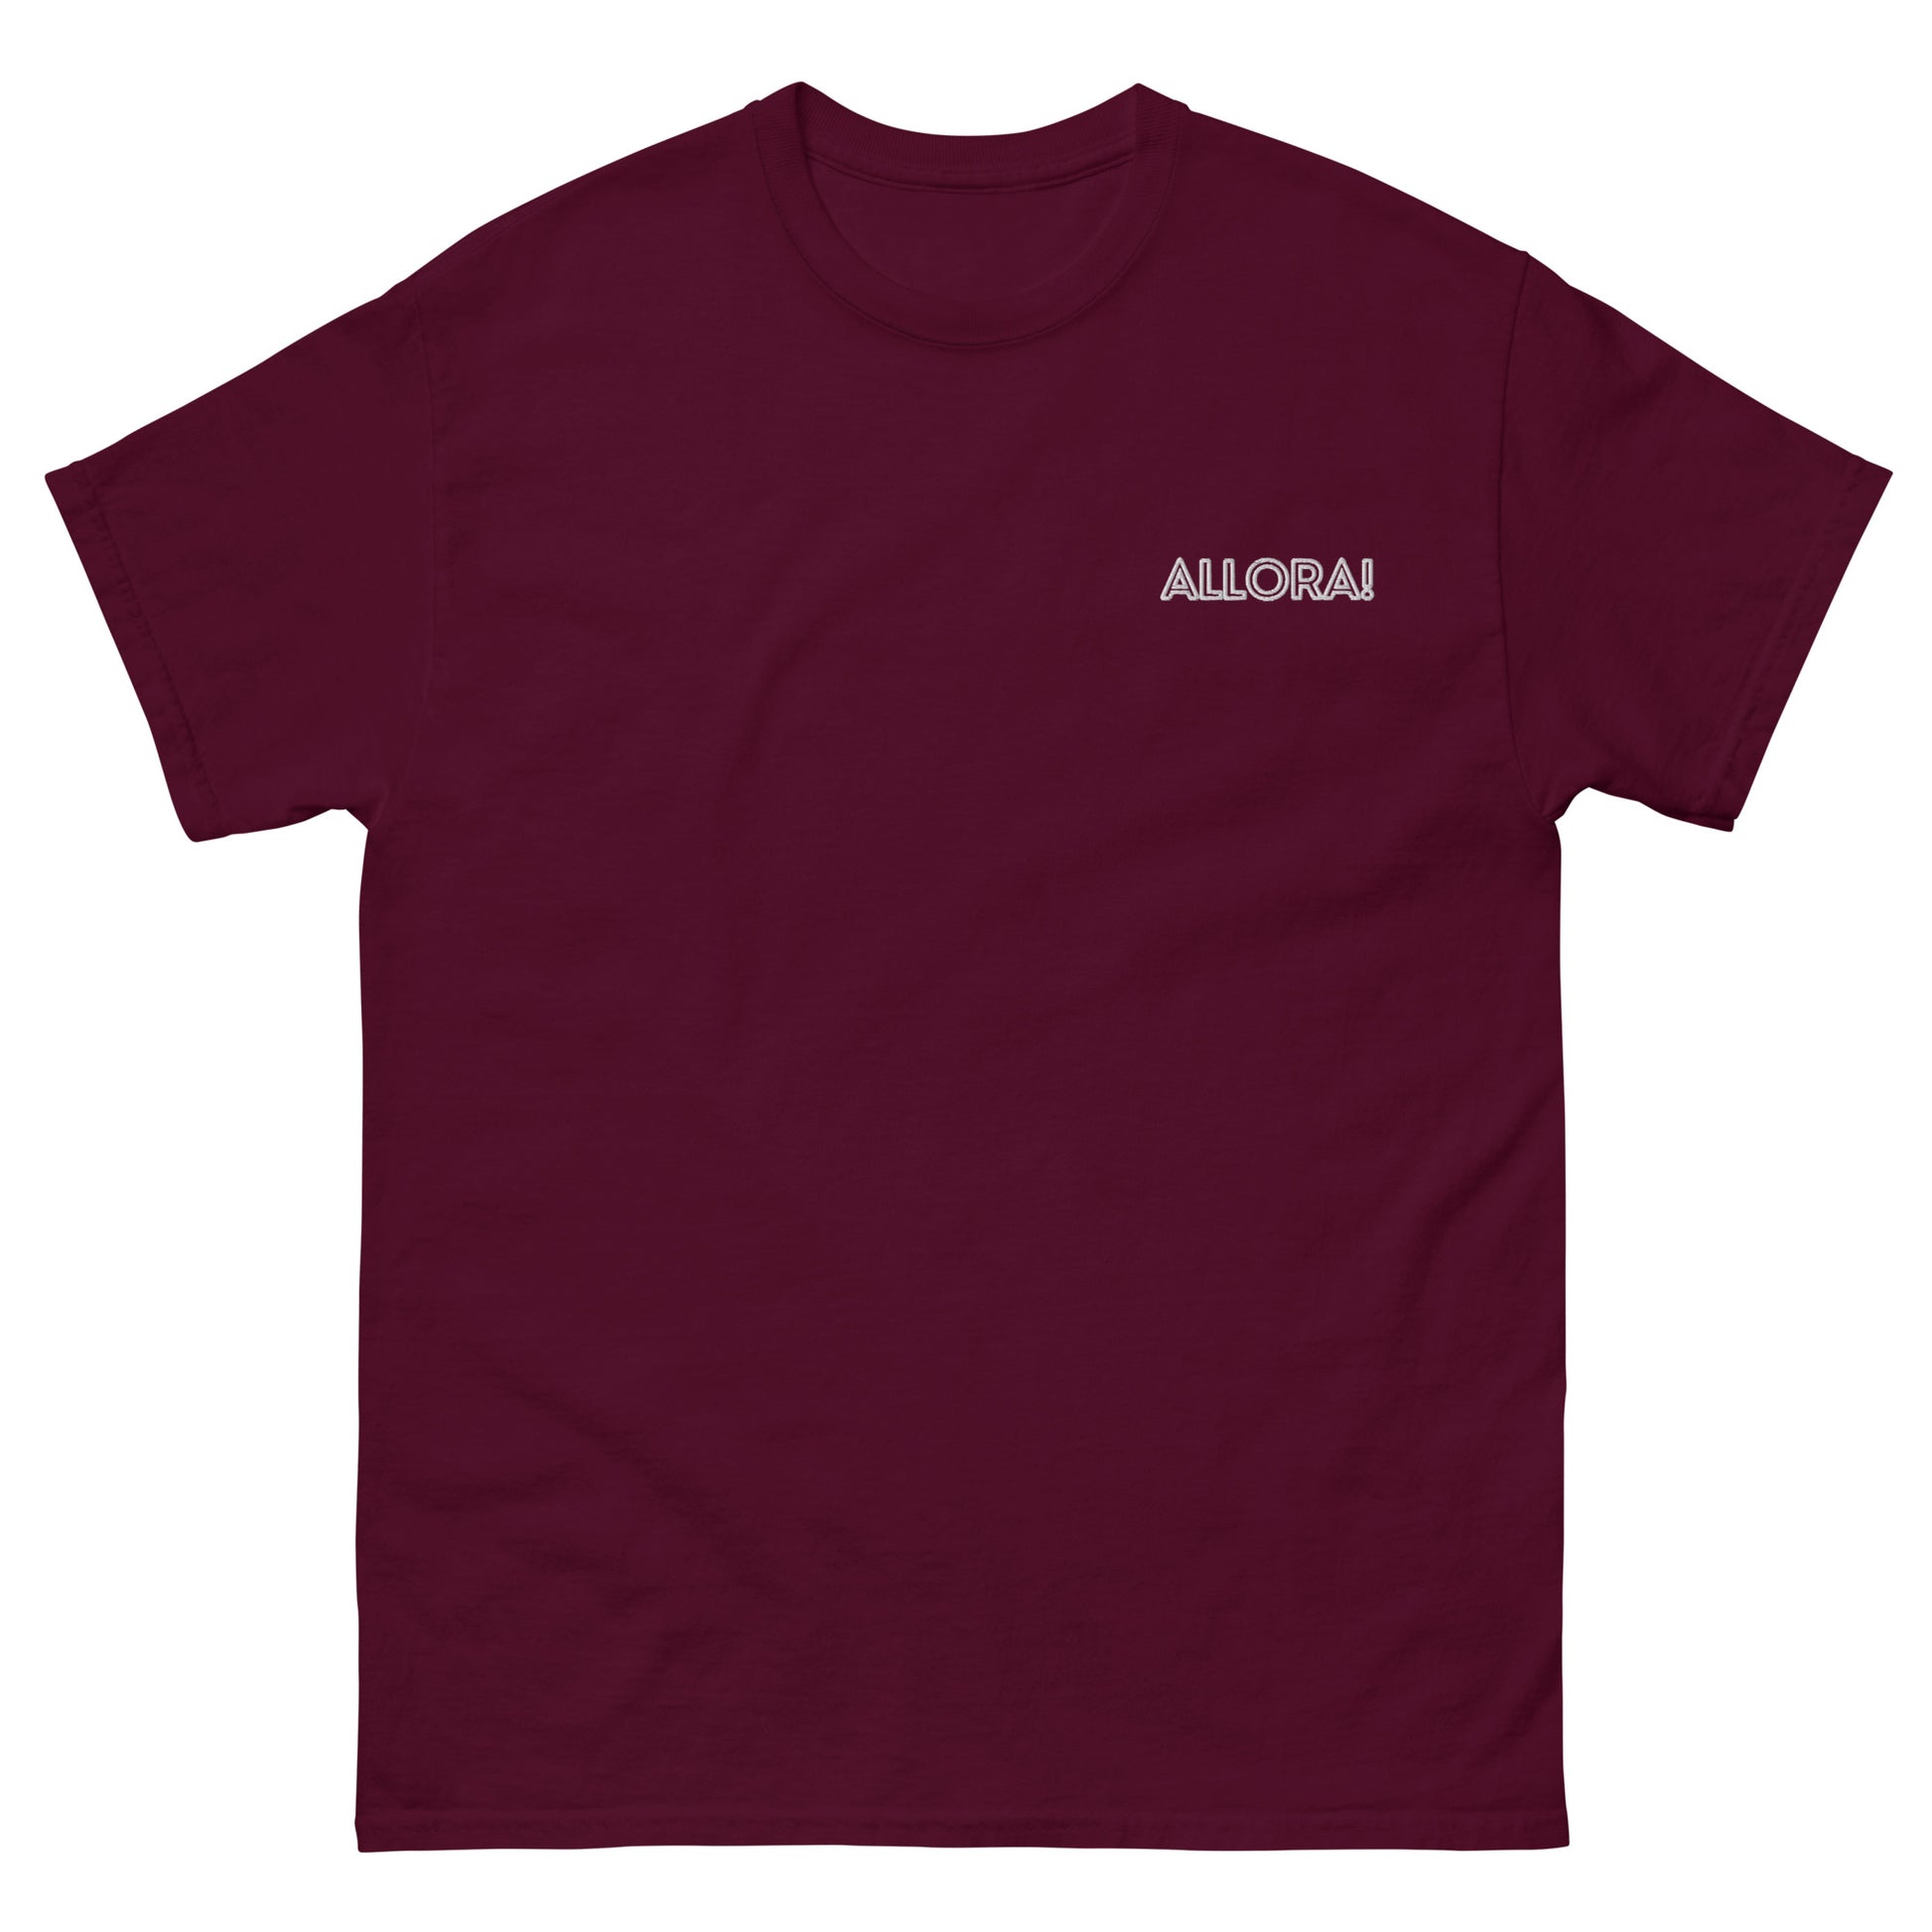 Allora! - Embroidered Classic Tee - PIZZ